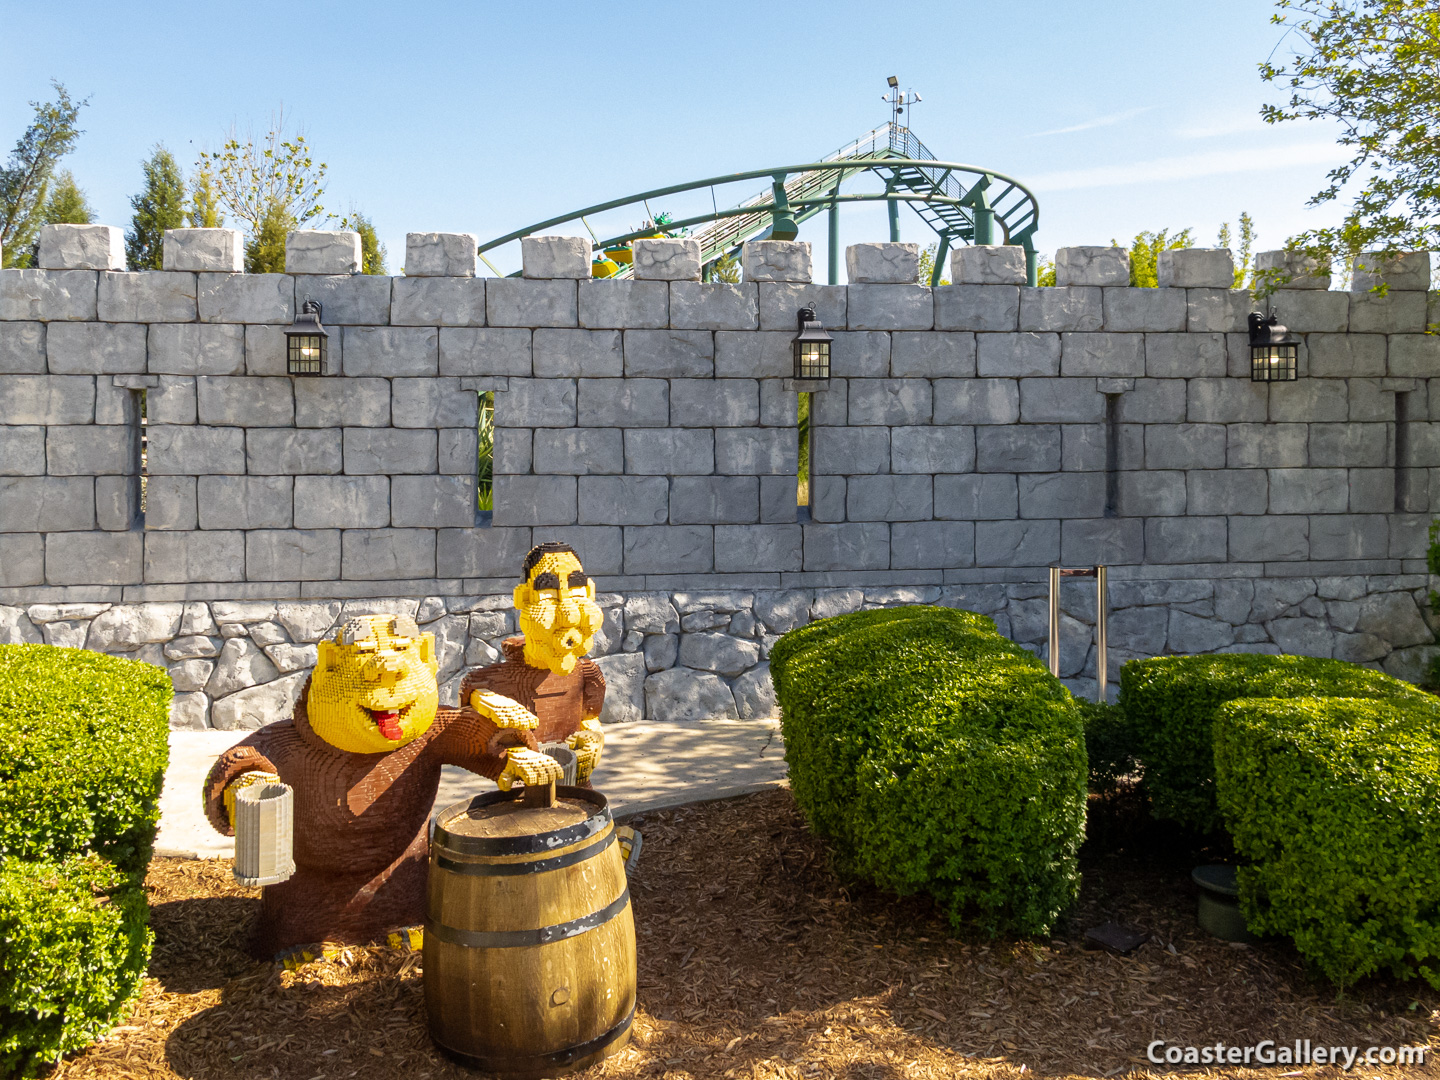 Lego monks drinking outside of The Dragon roller coaster at Legoland Florida